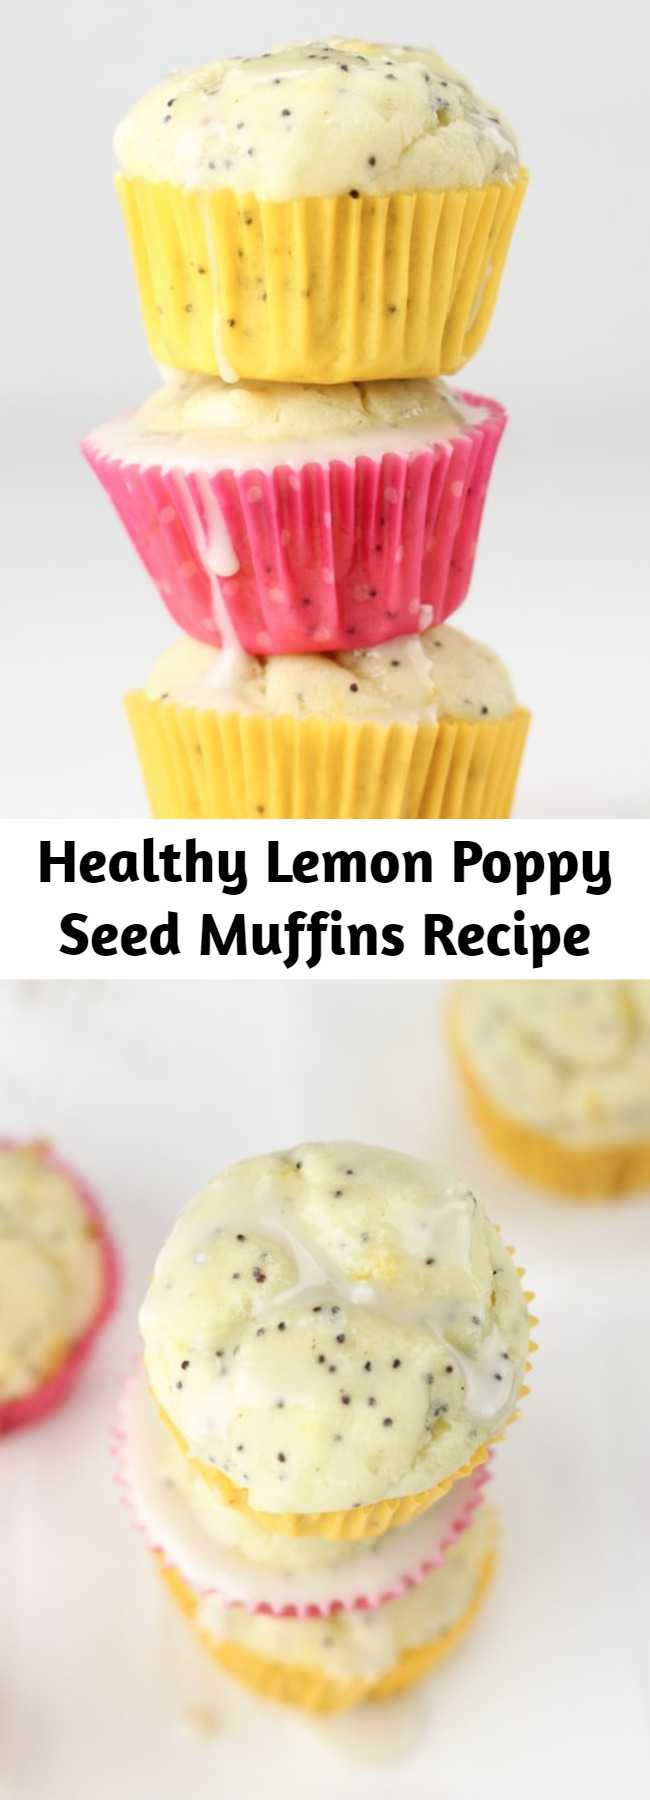 Healthy Lemon Poppy Seed Muffins Recipe - Healthy Lemon Poppy Seed Muffins recipe is super moist made with natural ingredients, gluten-free, dairy-free and low-sugar. Ultimate delicious plus healthy recipe for breakfast. Just 86 calories per muffin! It is the ultimate, delicious and healthy recipe for breakfast.